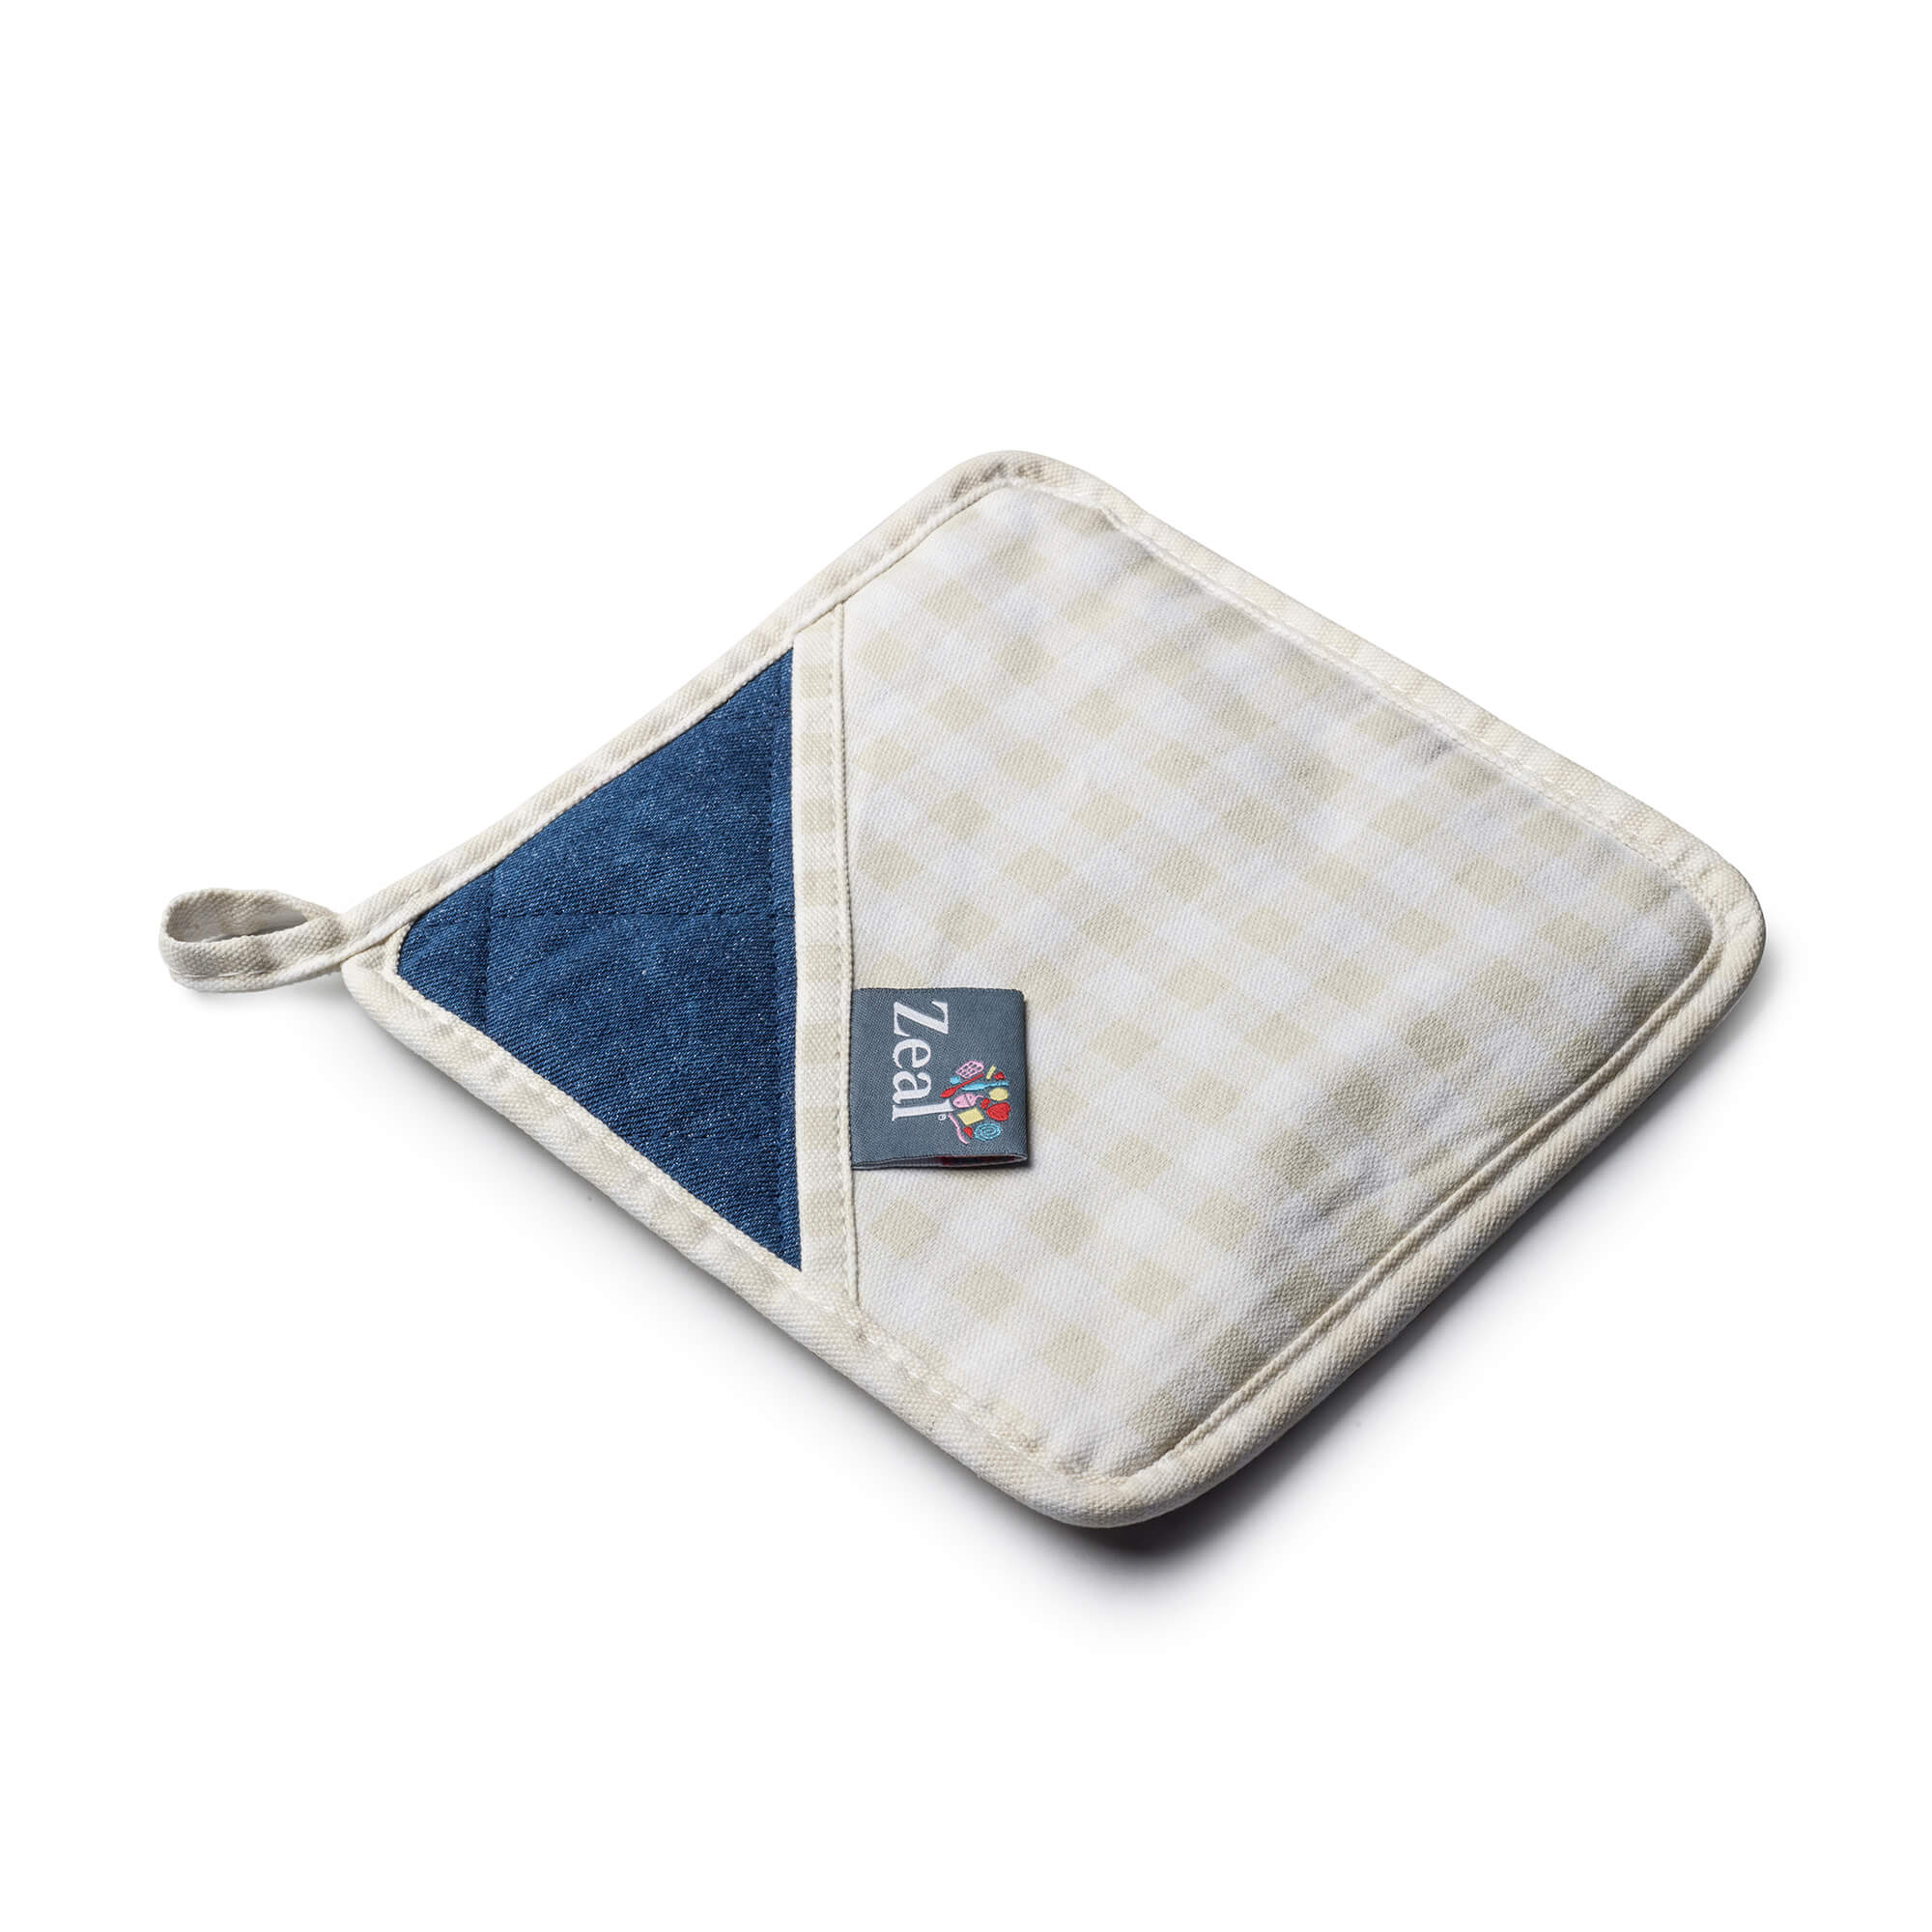 Cream Square Shaped Silicone Hot Mat and Grab with gingham fabric 